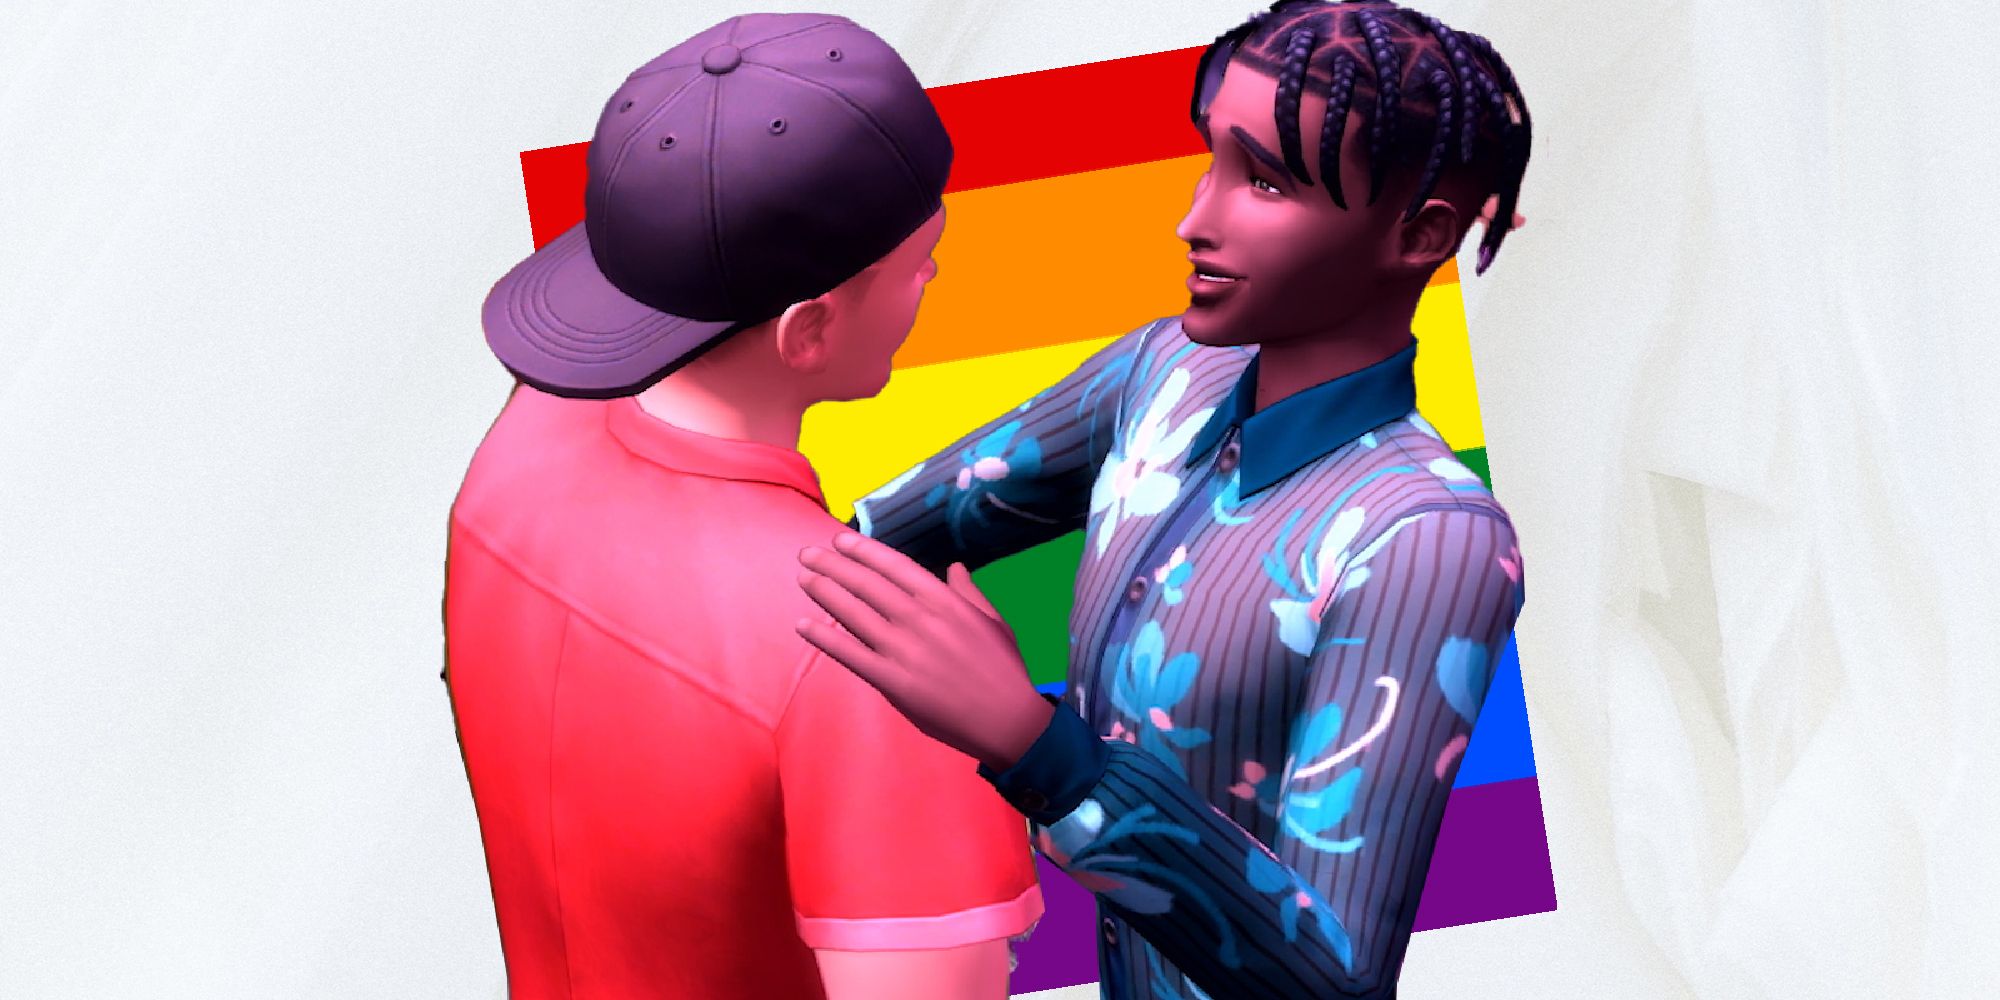 The Sims 4s New Sexuality Customisation Is Step In The Right Direction But More Could Be Done